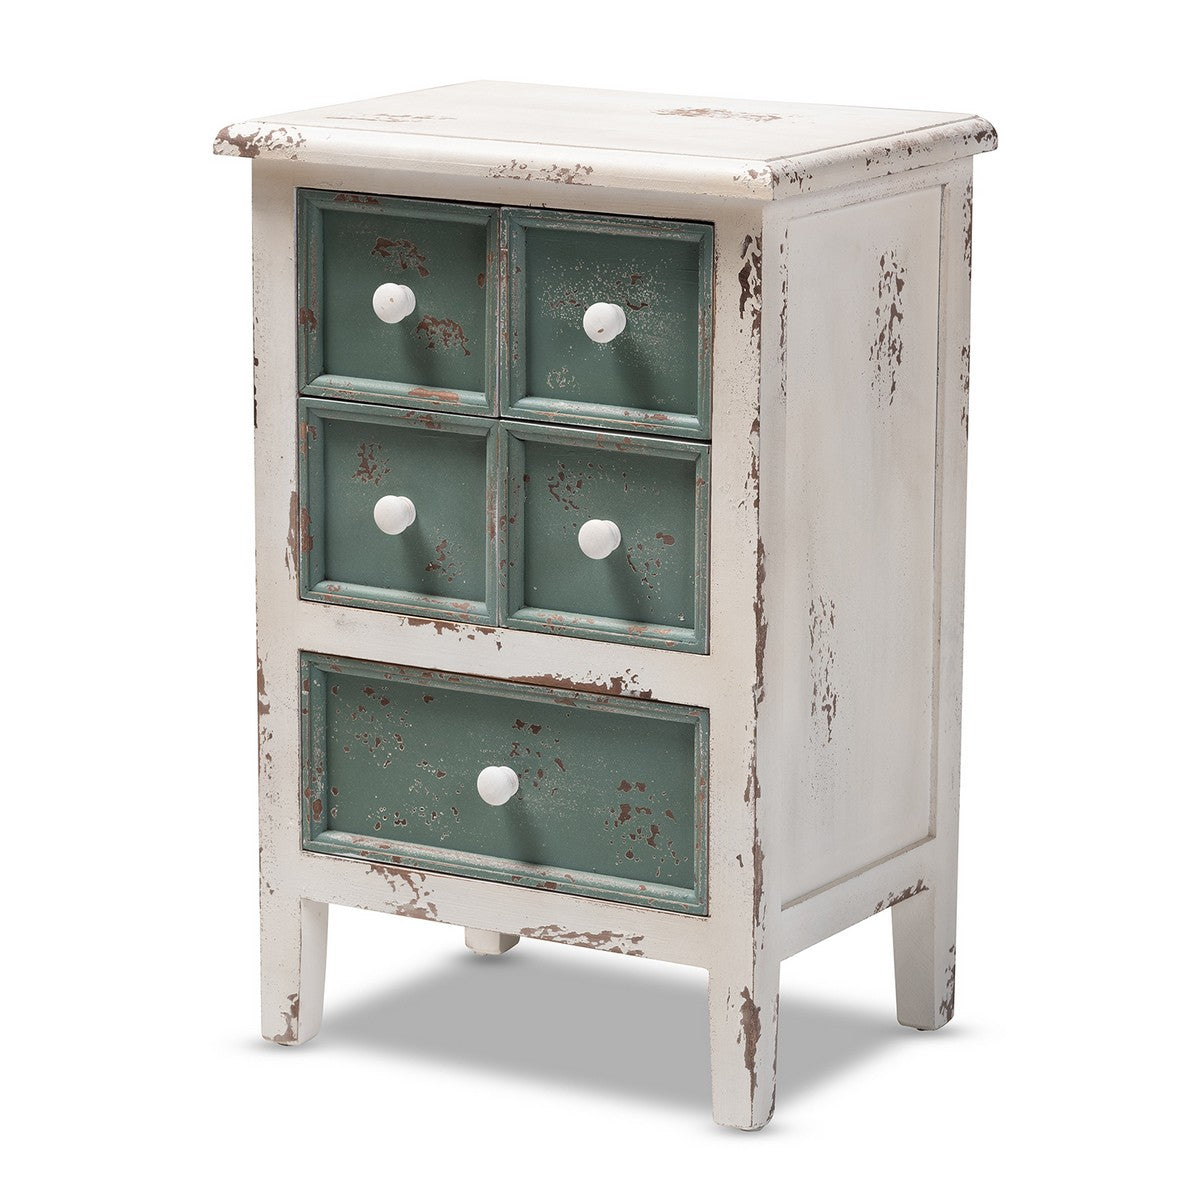 Baxton Studio Angeline Antique French Country Cottage Distressed White and Teal Finished Wood 5-Drawer Accent Chest Baxton Studio-Chests-Minimal And Modern - 1